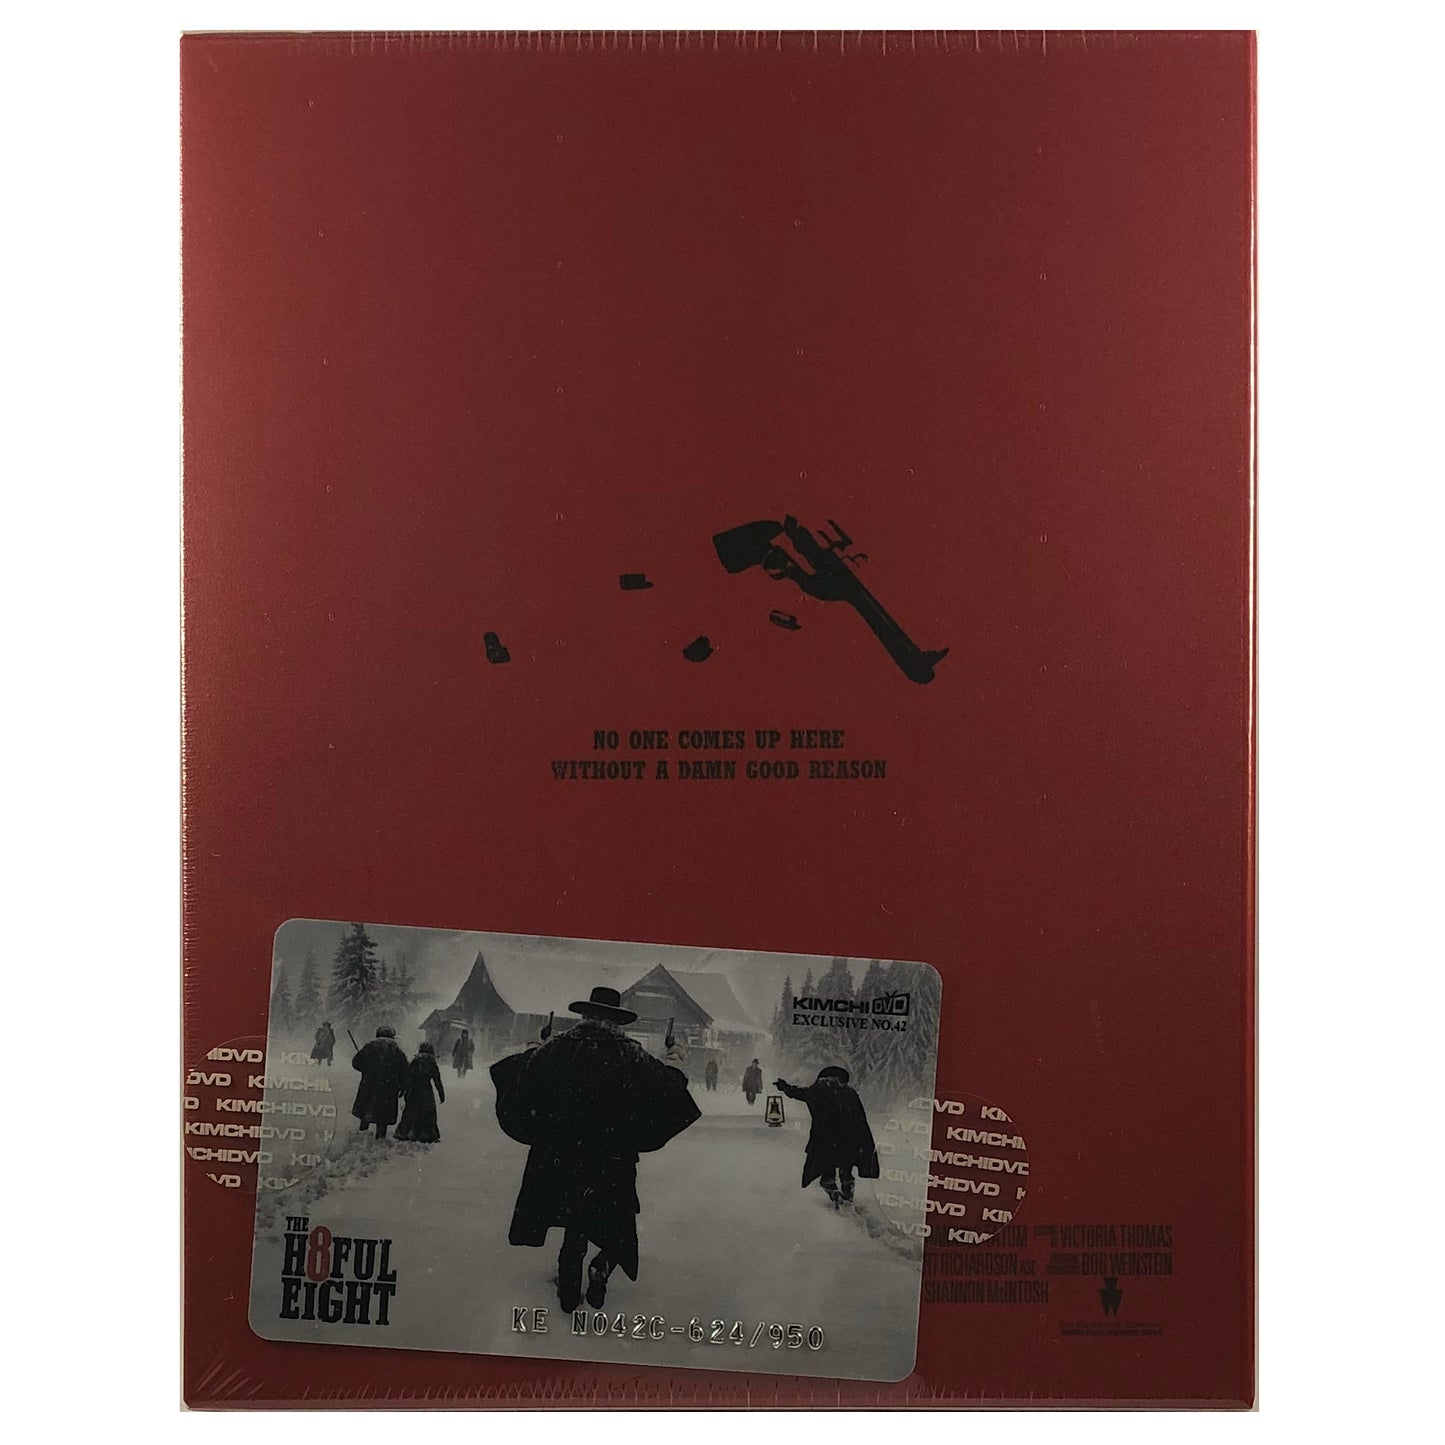 The Hateful Eight Scanavo Fullslip Blu-Ray - Limited Edition - KimchiDVD Exclusive #42